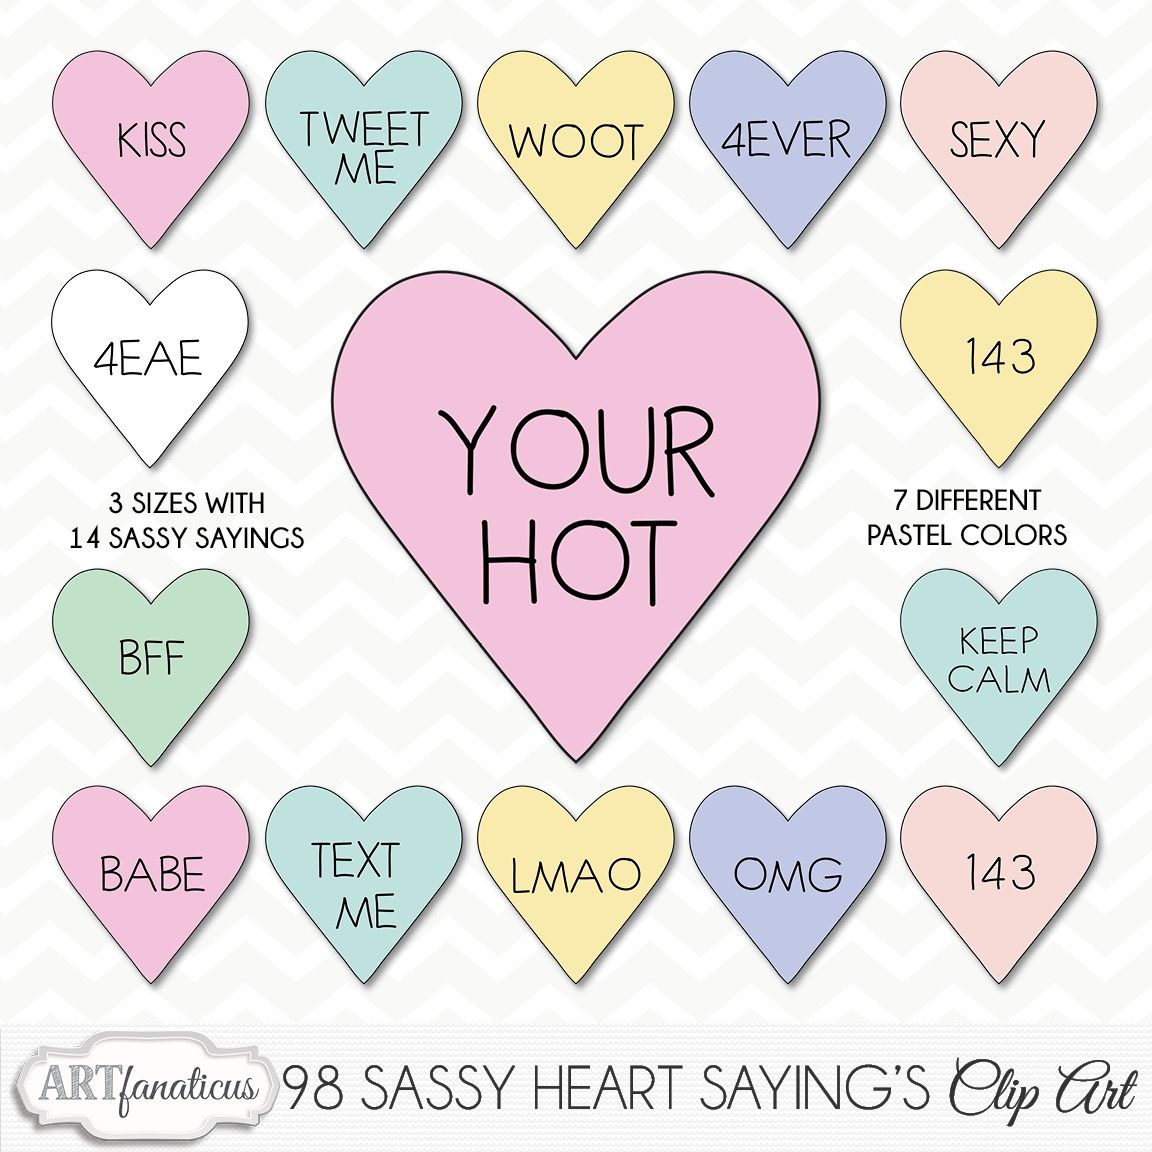 Sassy Candy Heart Sayings Clipart Sassy Heart Sayings Clipart 98 Png